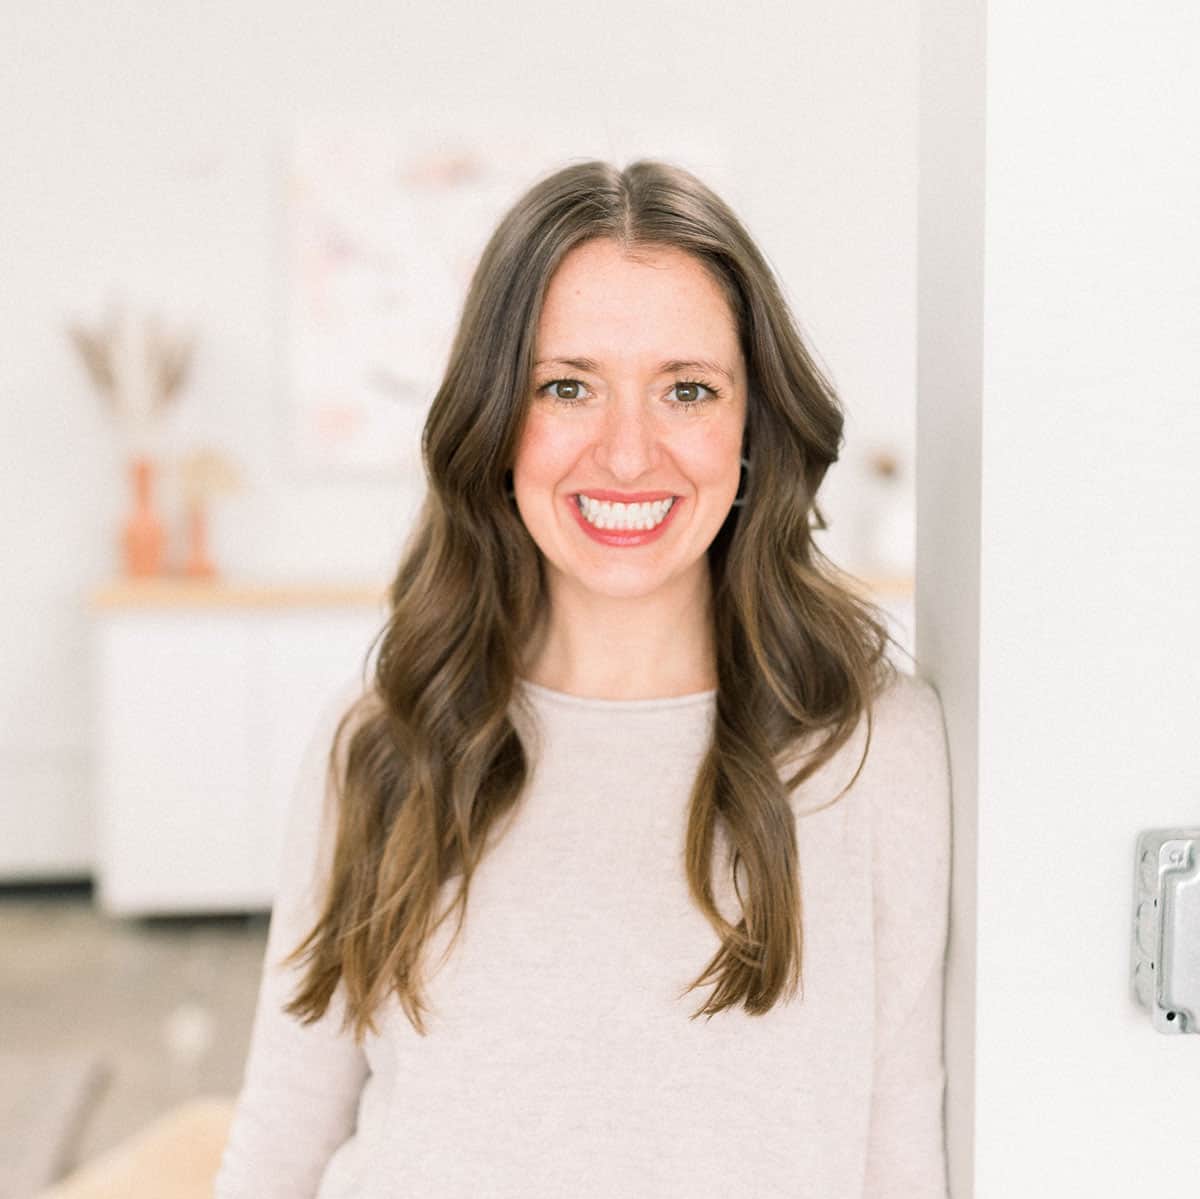 A fit foodie woman smiling in front of a wall.